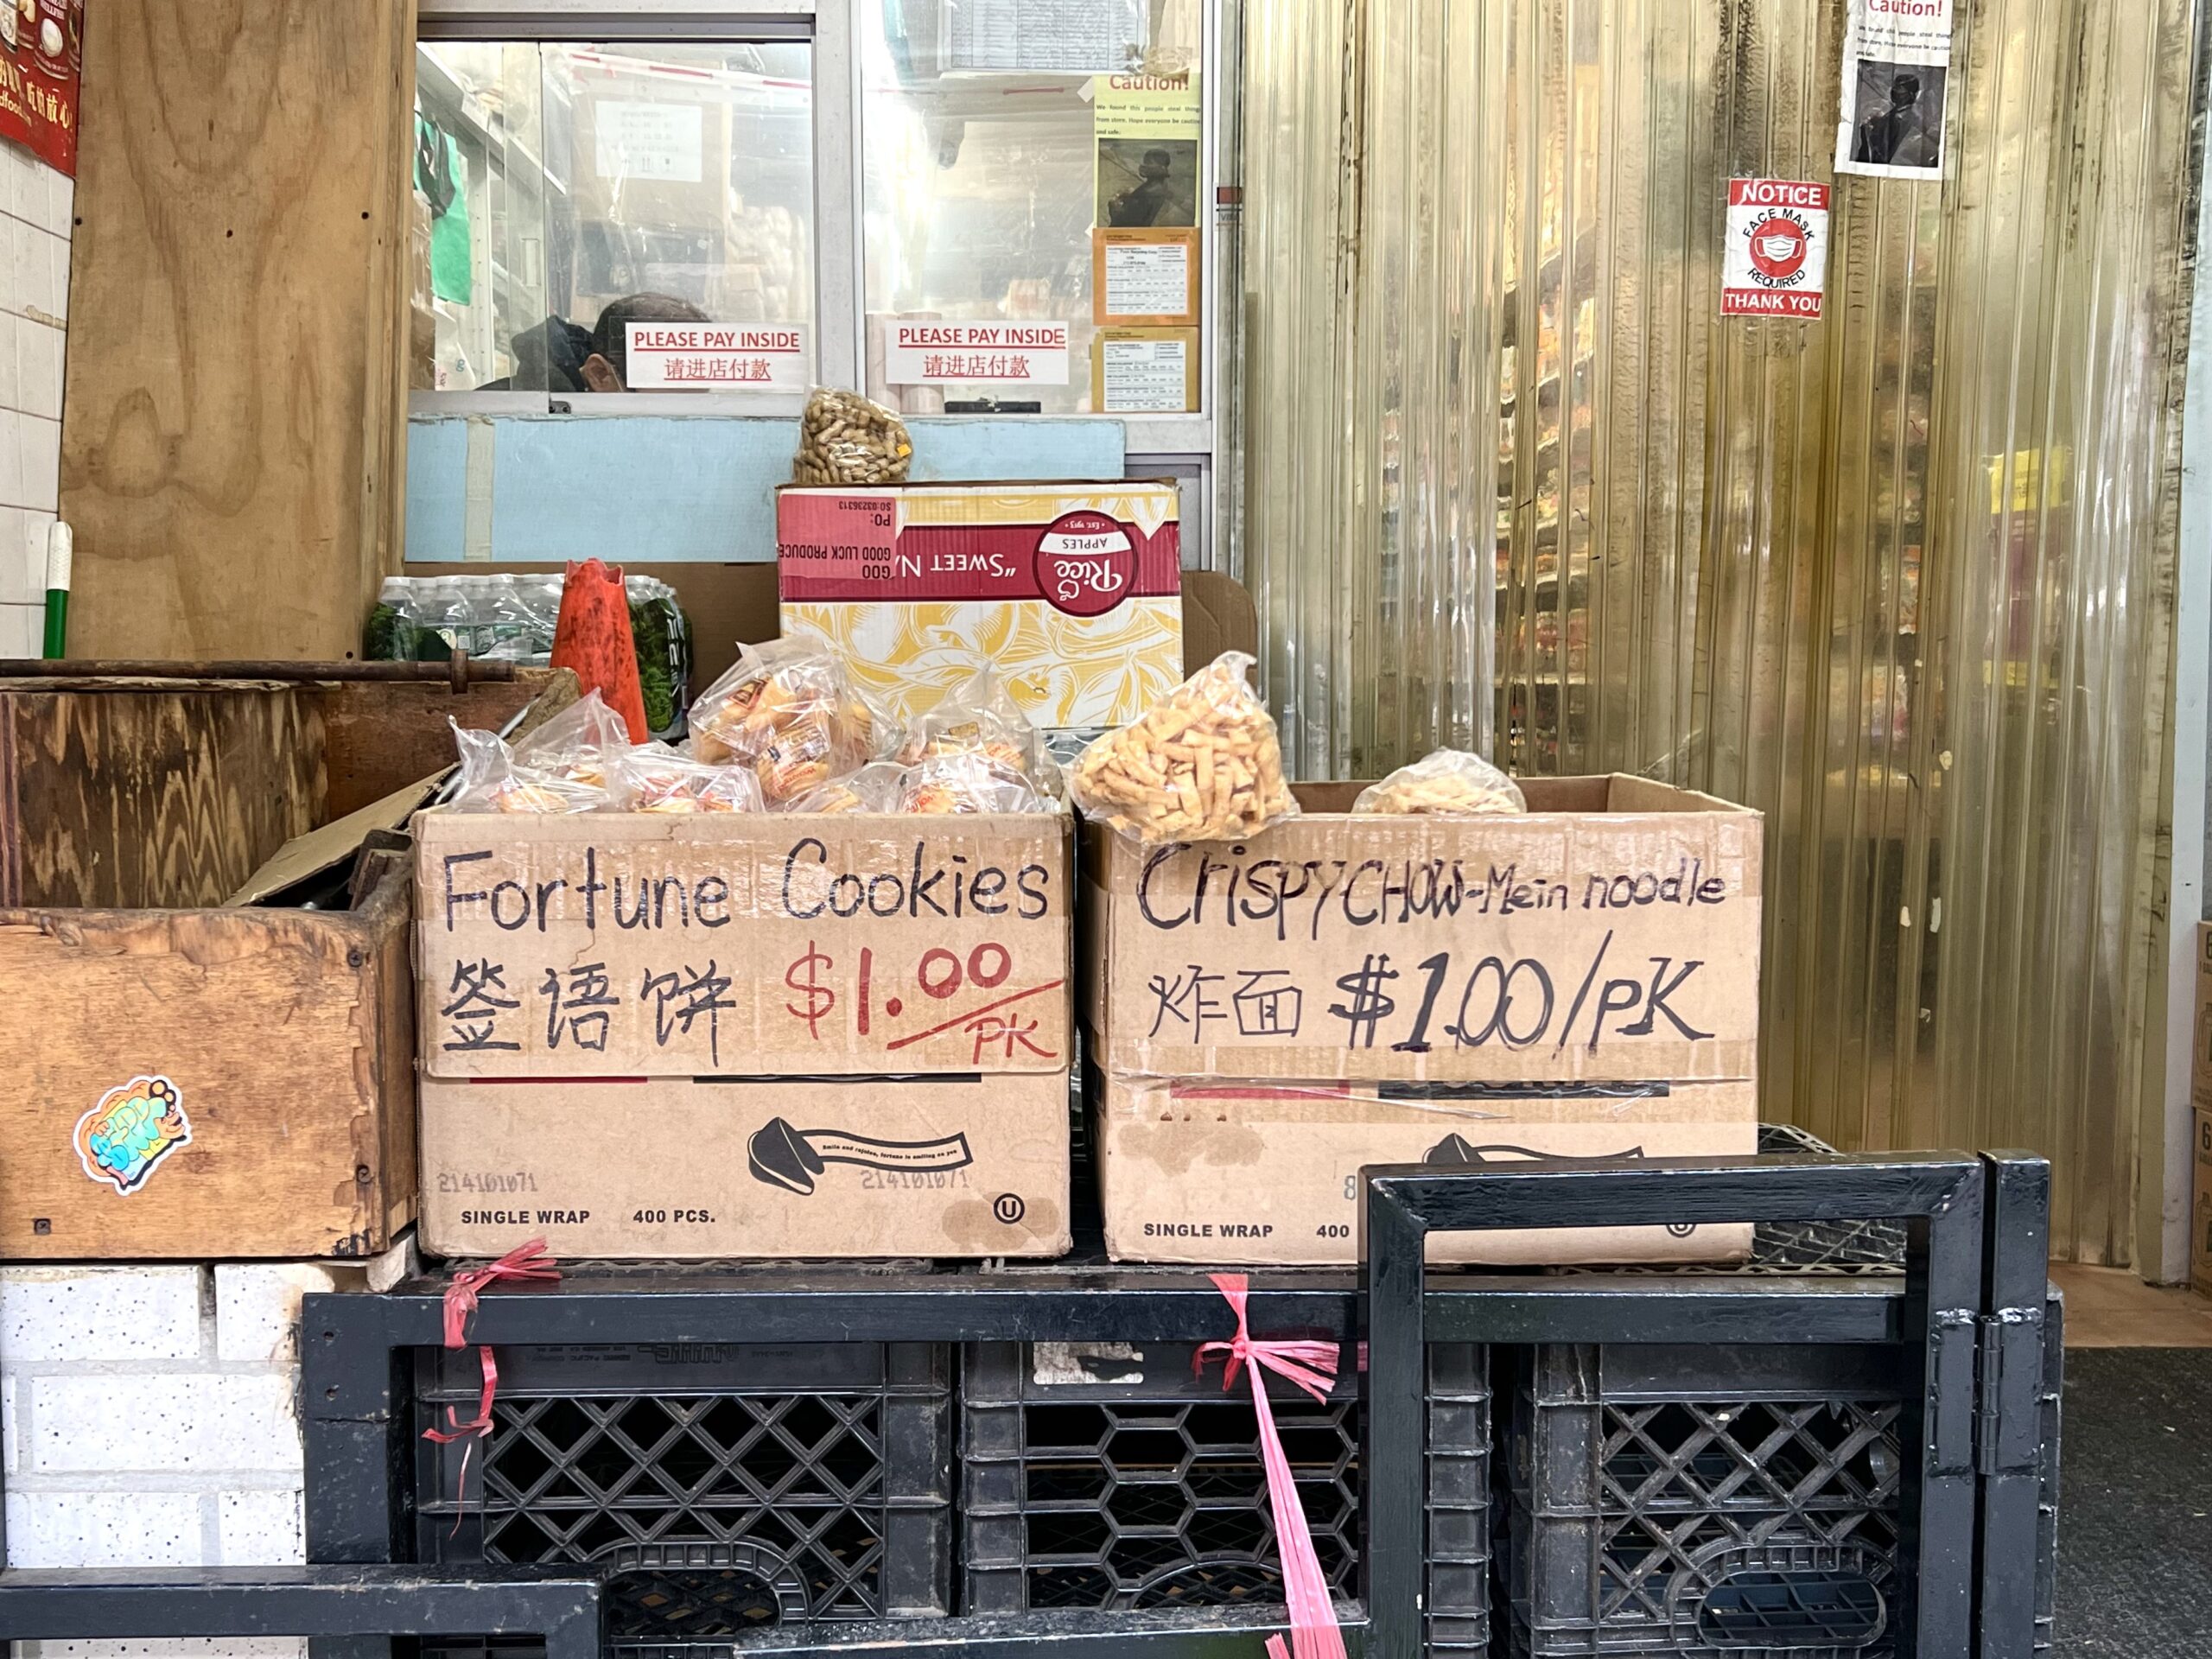 Fortune Cookies in Chinatown